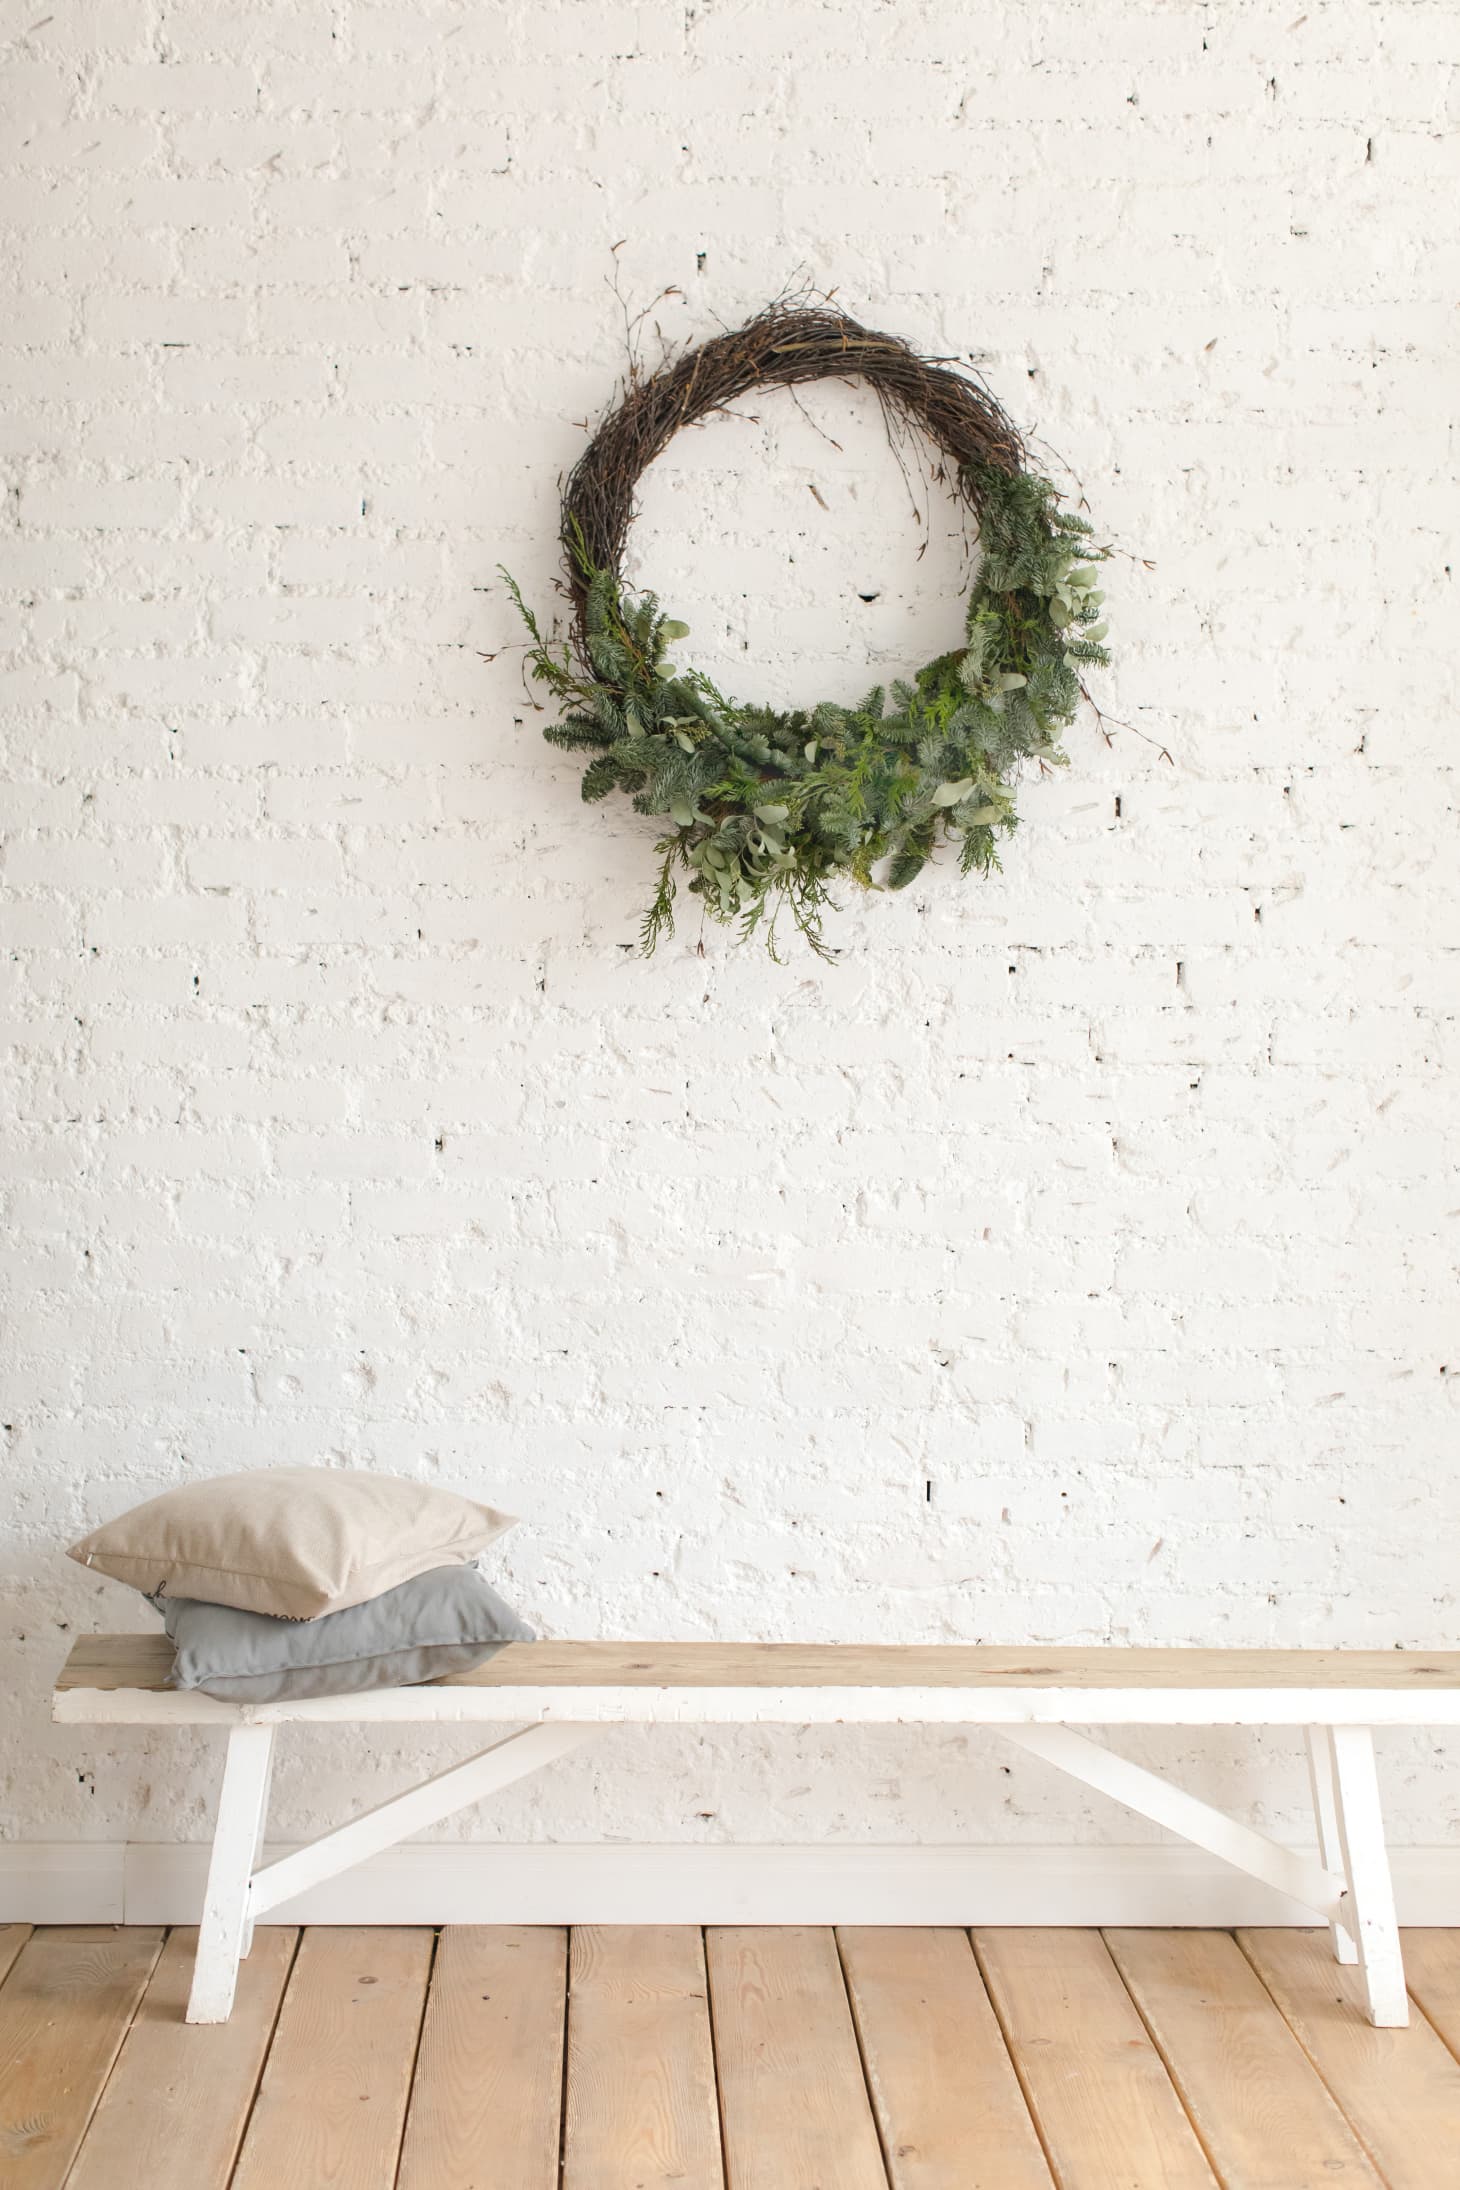 How to Hang a Wreath on Any Surface | Apartment Therapy